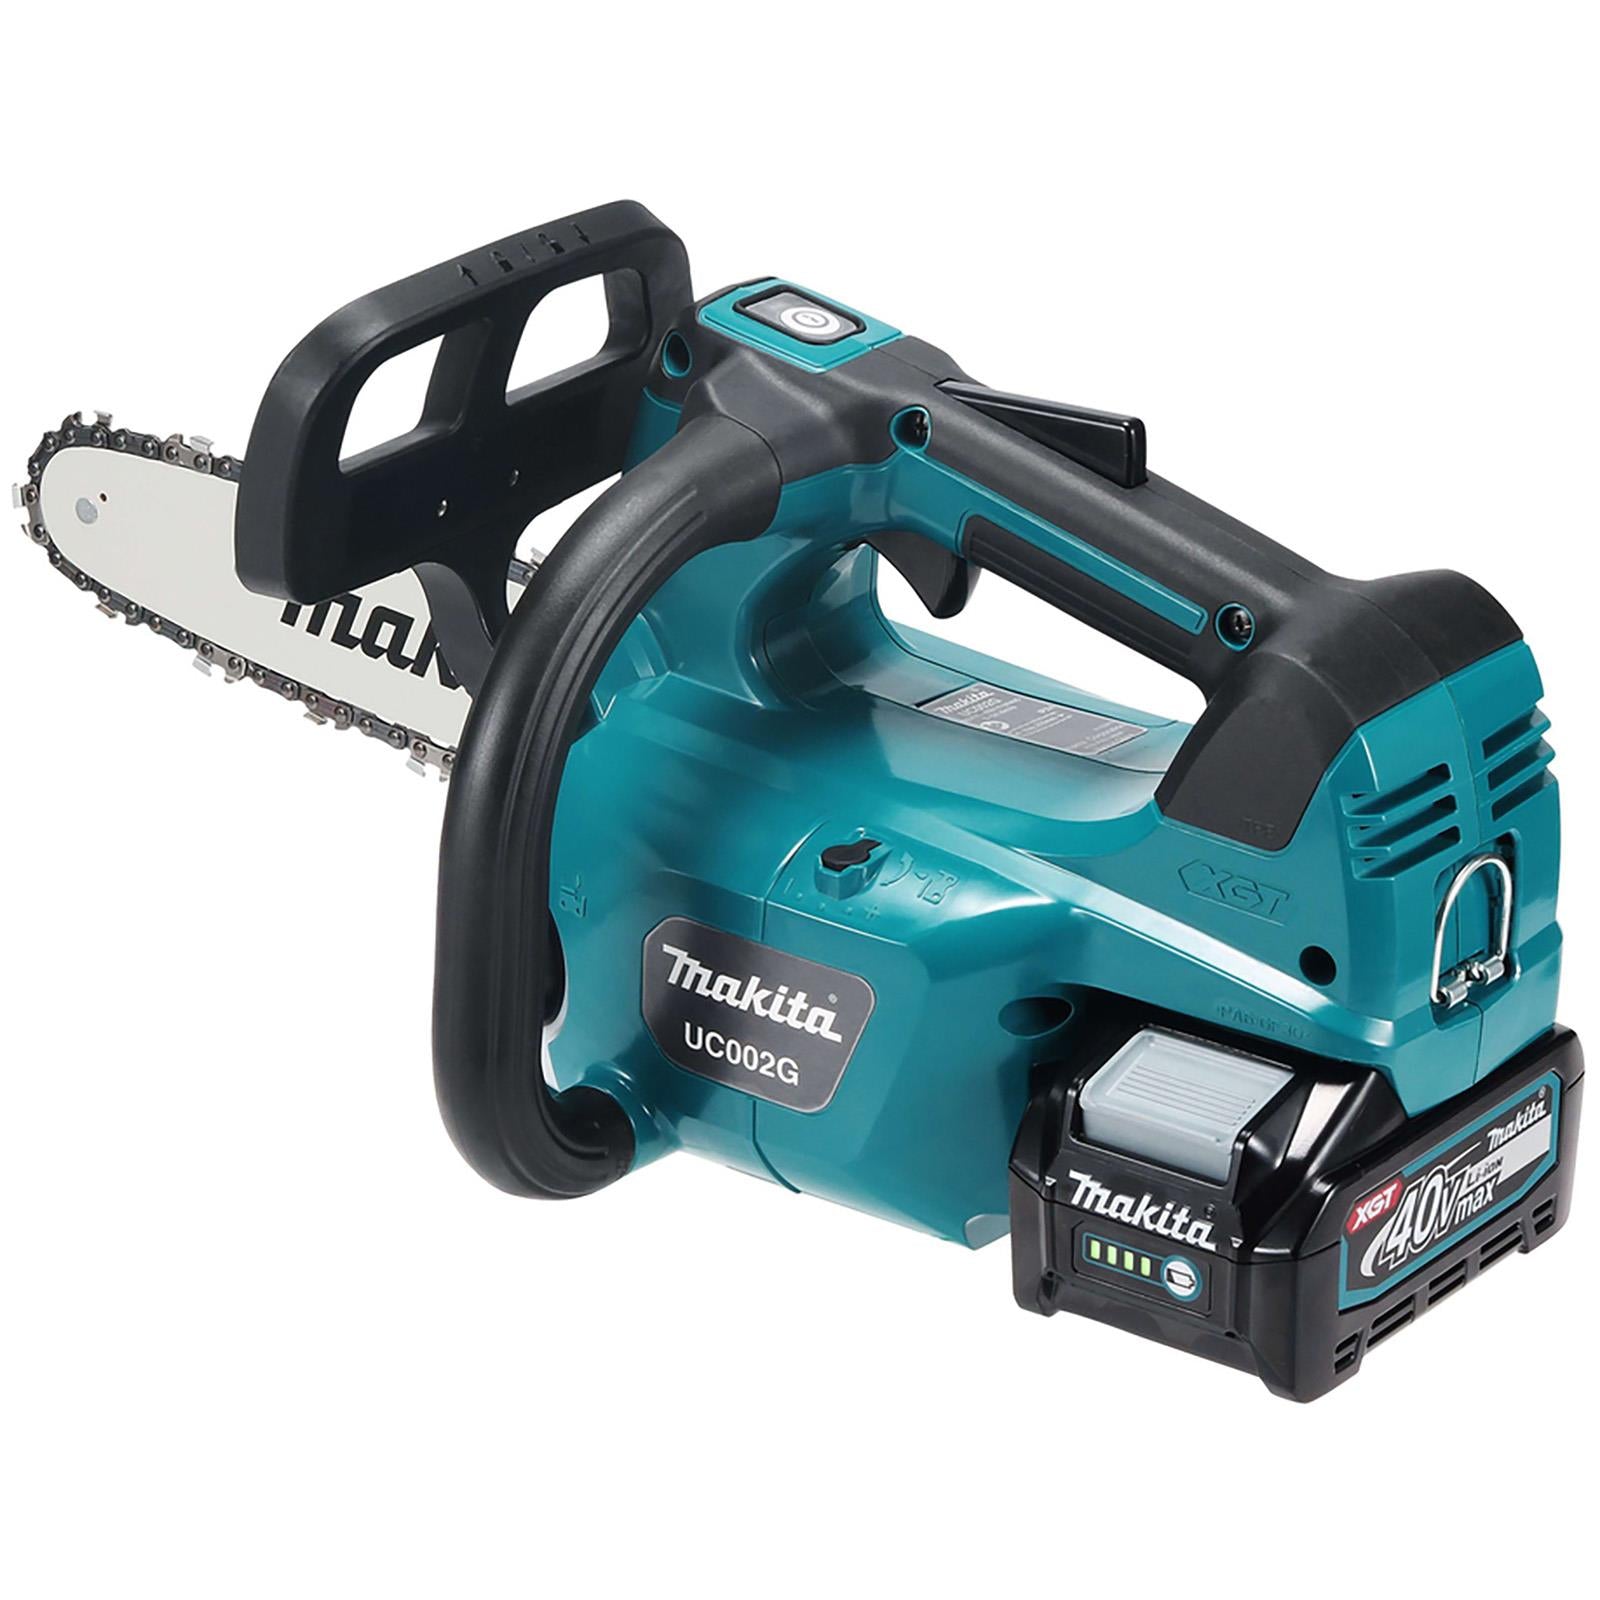 Makita Chainsaw Kit 25cm 10" 40V XGT Brushless Cordless Top Handle 2 x 2.5Ah Battery and Rapid Charger Garden Tree Cutting Pruning UC002GD202